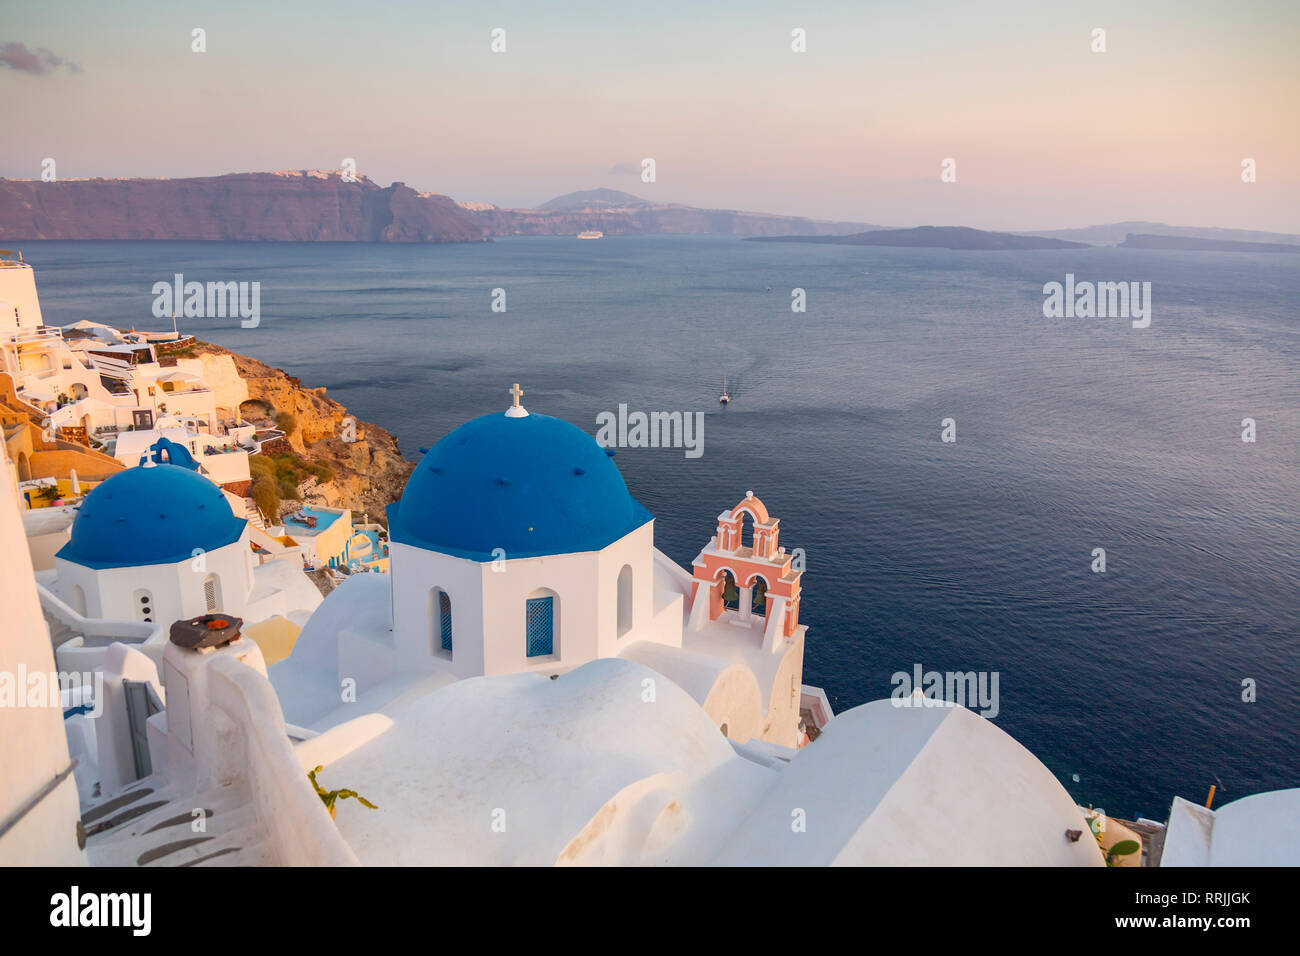 View of blue domes of churches in Oia village, Santorini, Cyclades, Aegean Islands, Greek Islands, Greece, Europe Stock Photo